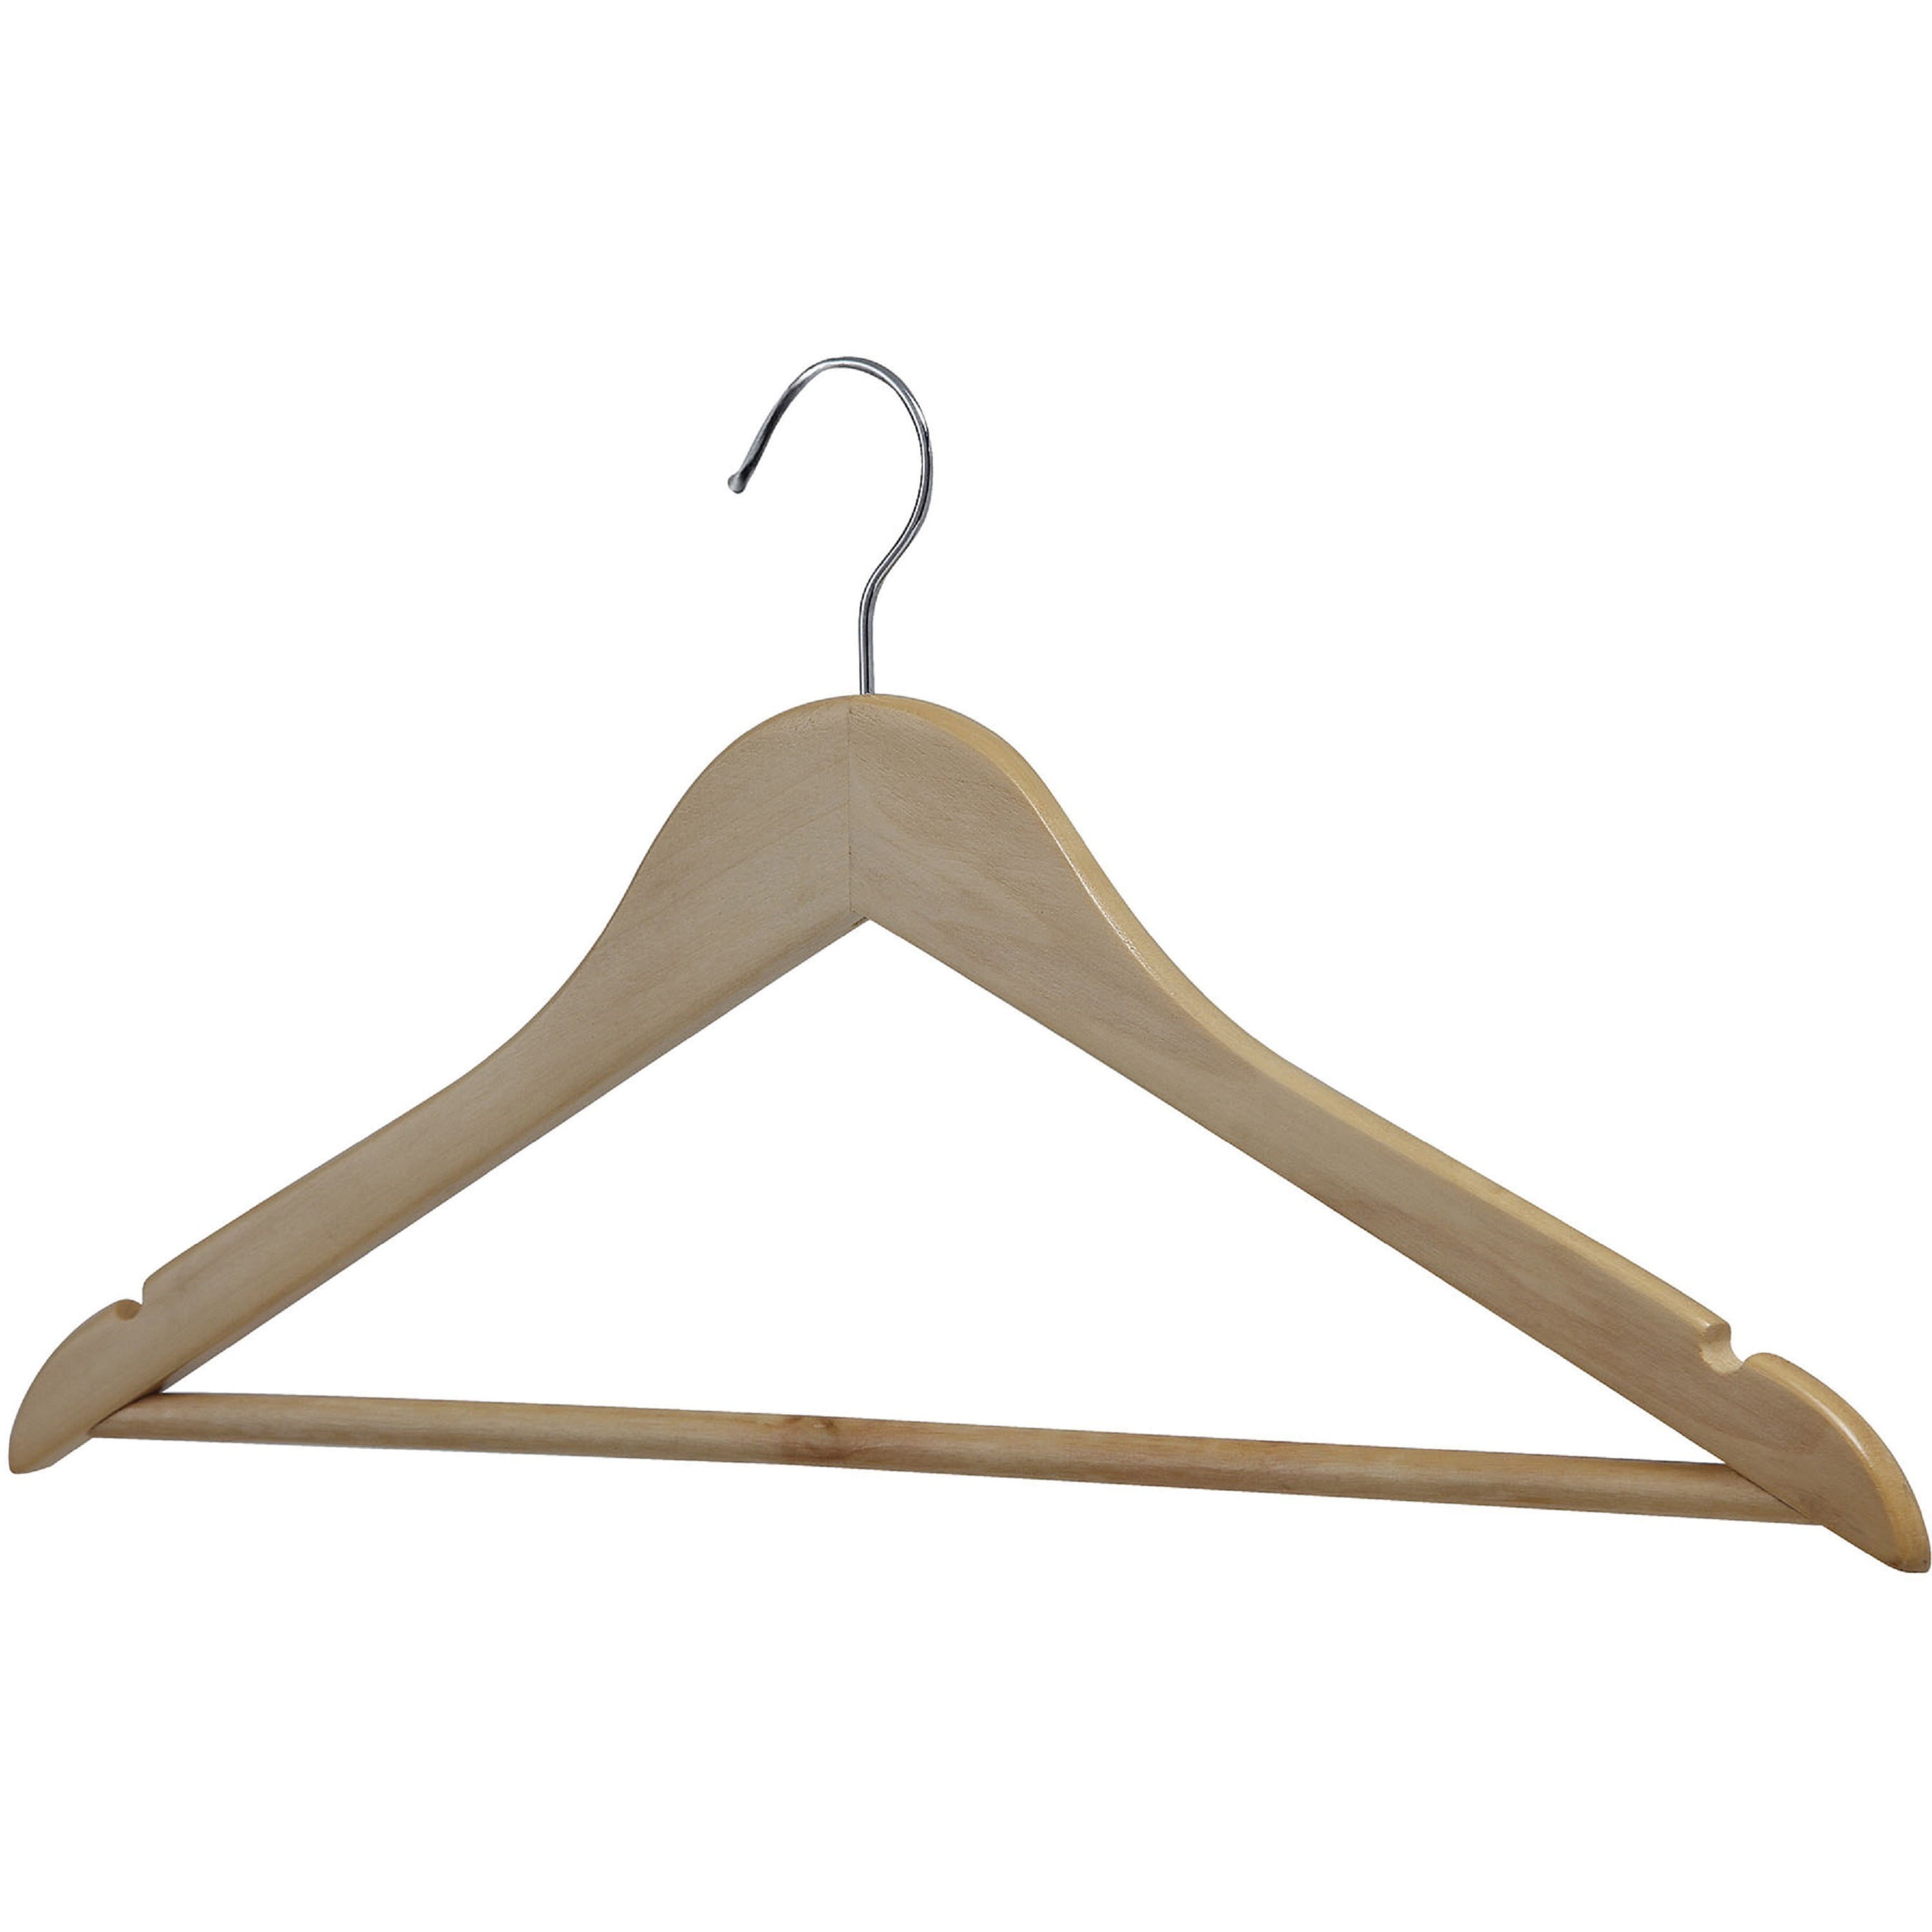 50 Natural Finish Wood Clothes or Coat Hangers 13 1/2" 